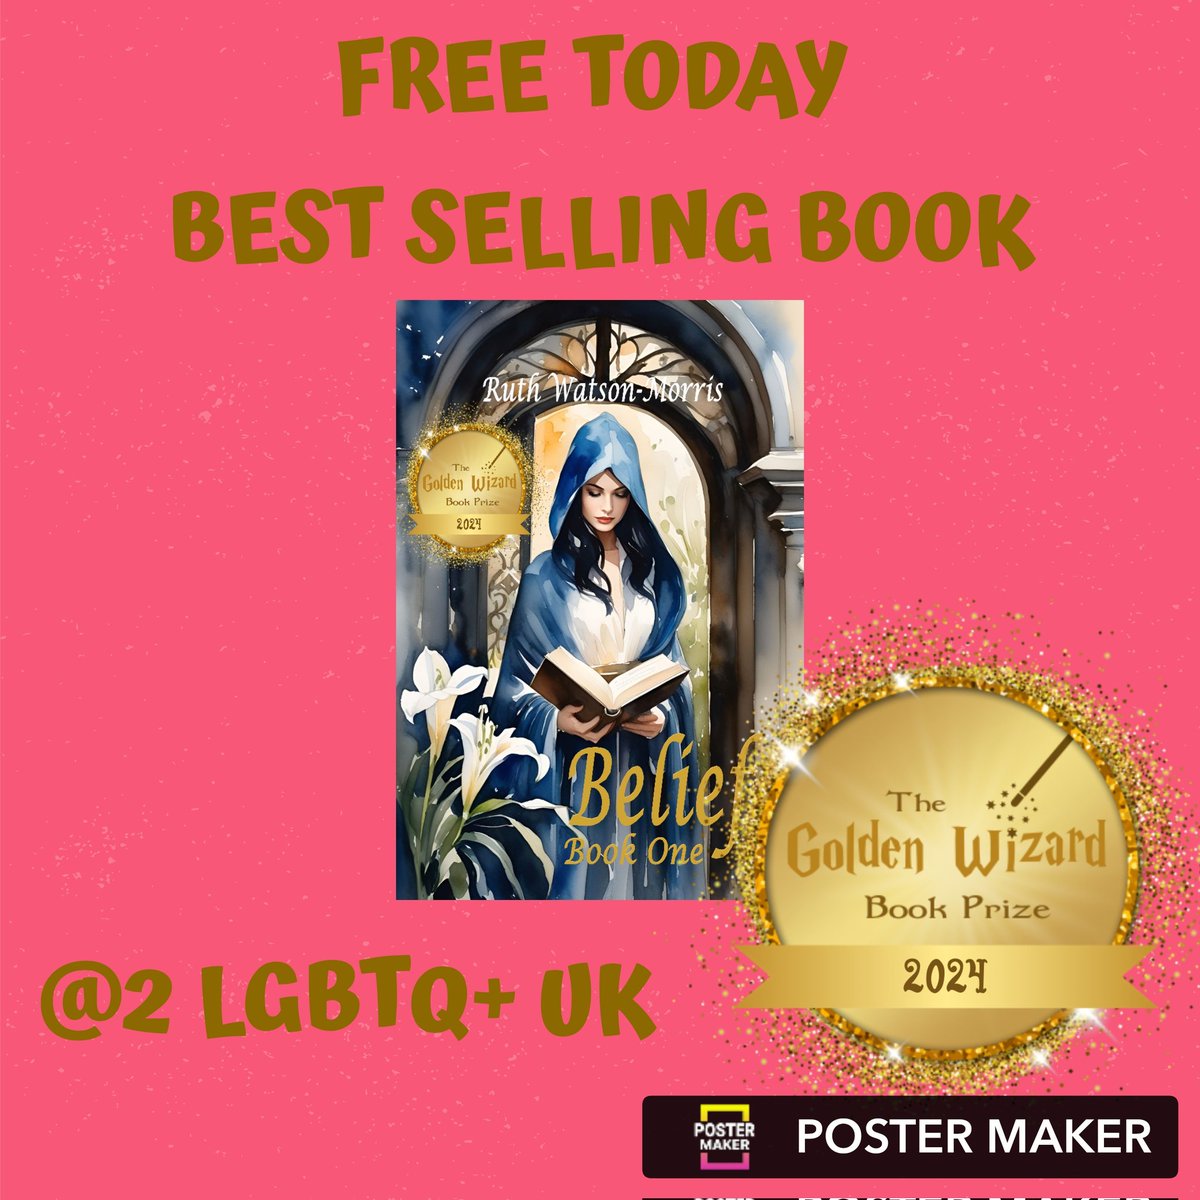 BELIEF FREE ON KINDLE TODAY! #gothic #thriller #death #free #freebie #FreeBook #goldenwizard Belief is a 'reaper,' bringing the souls of the departed across the vale, but to where? Not an answer she will get from her Father, Hans. UK 🇬🇧 Kindle: amzn.eu/d/9DyVcPx